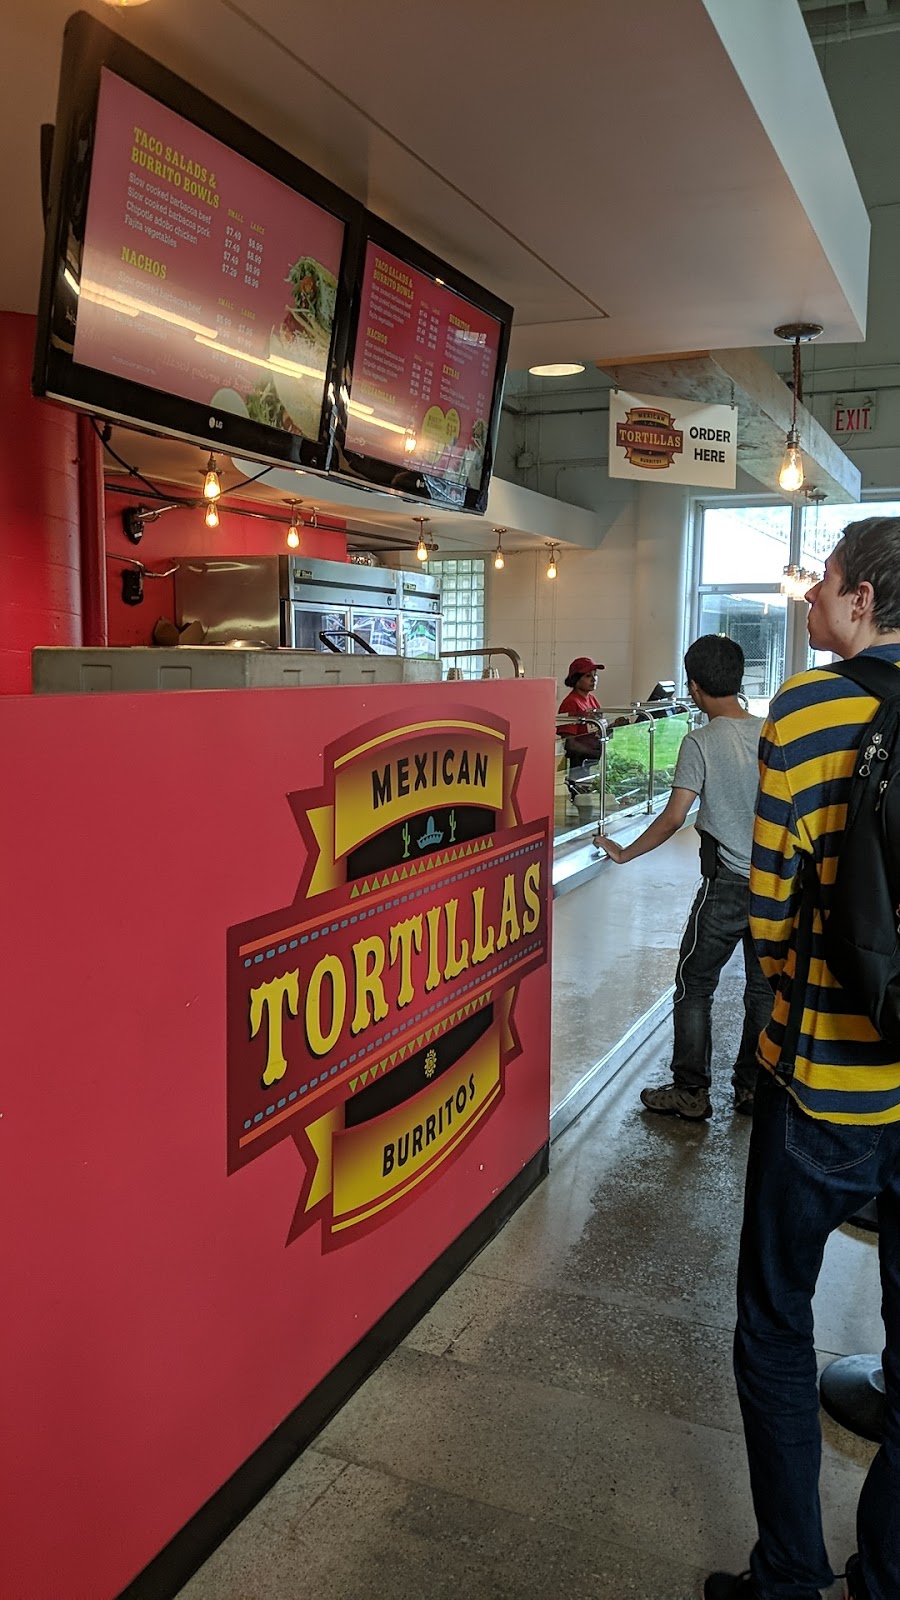 Mexican Tortillas Burritos | restaurant | 100 St George St, Toronto, ON M5S 3G3, Canada | 4169781309 OR +1 416-978-1309